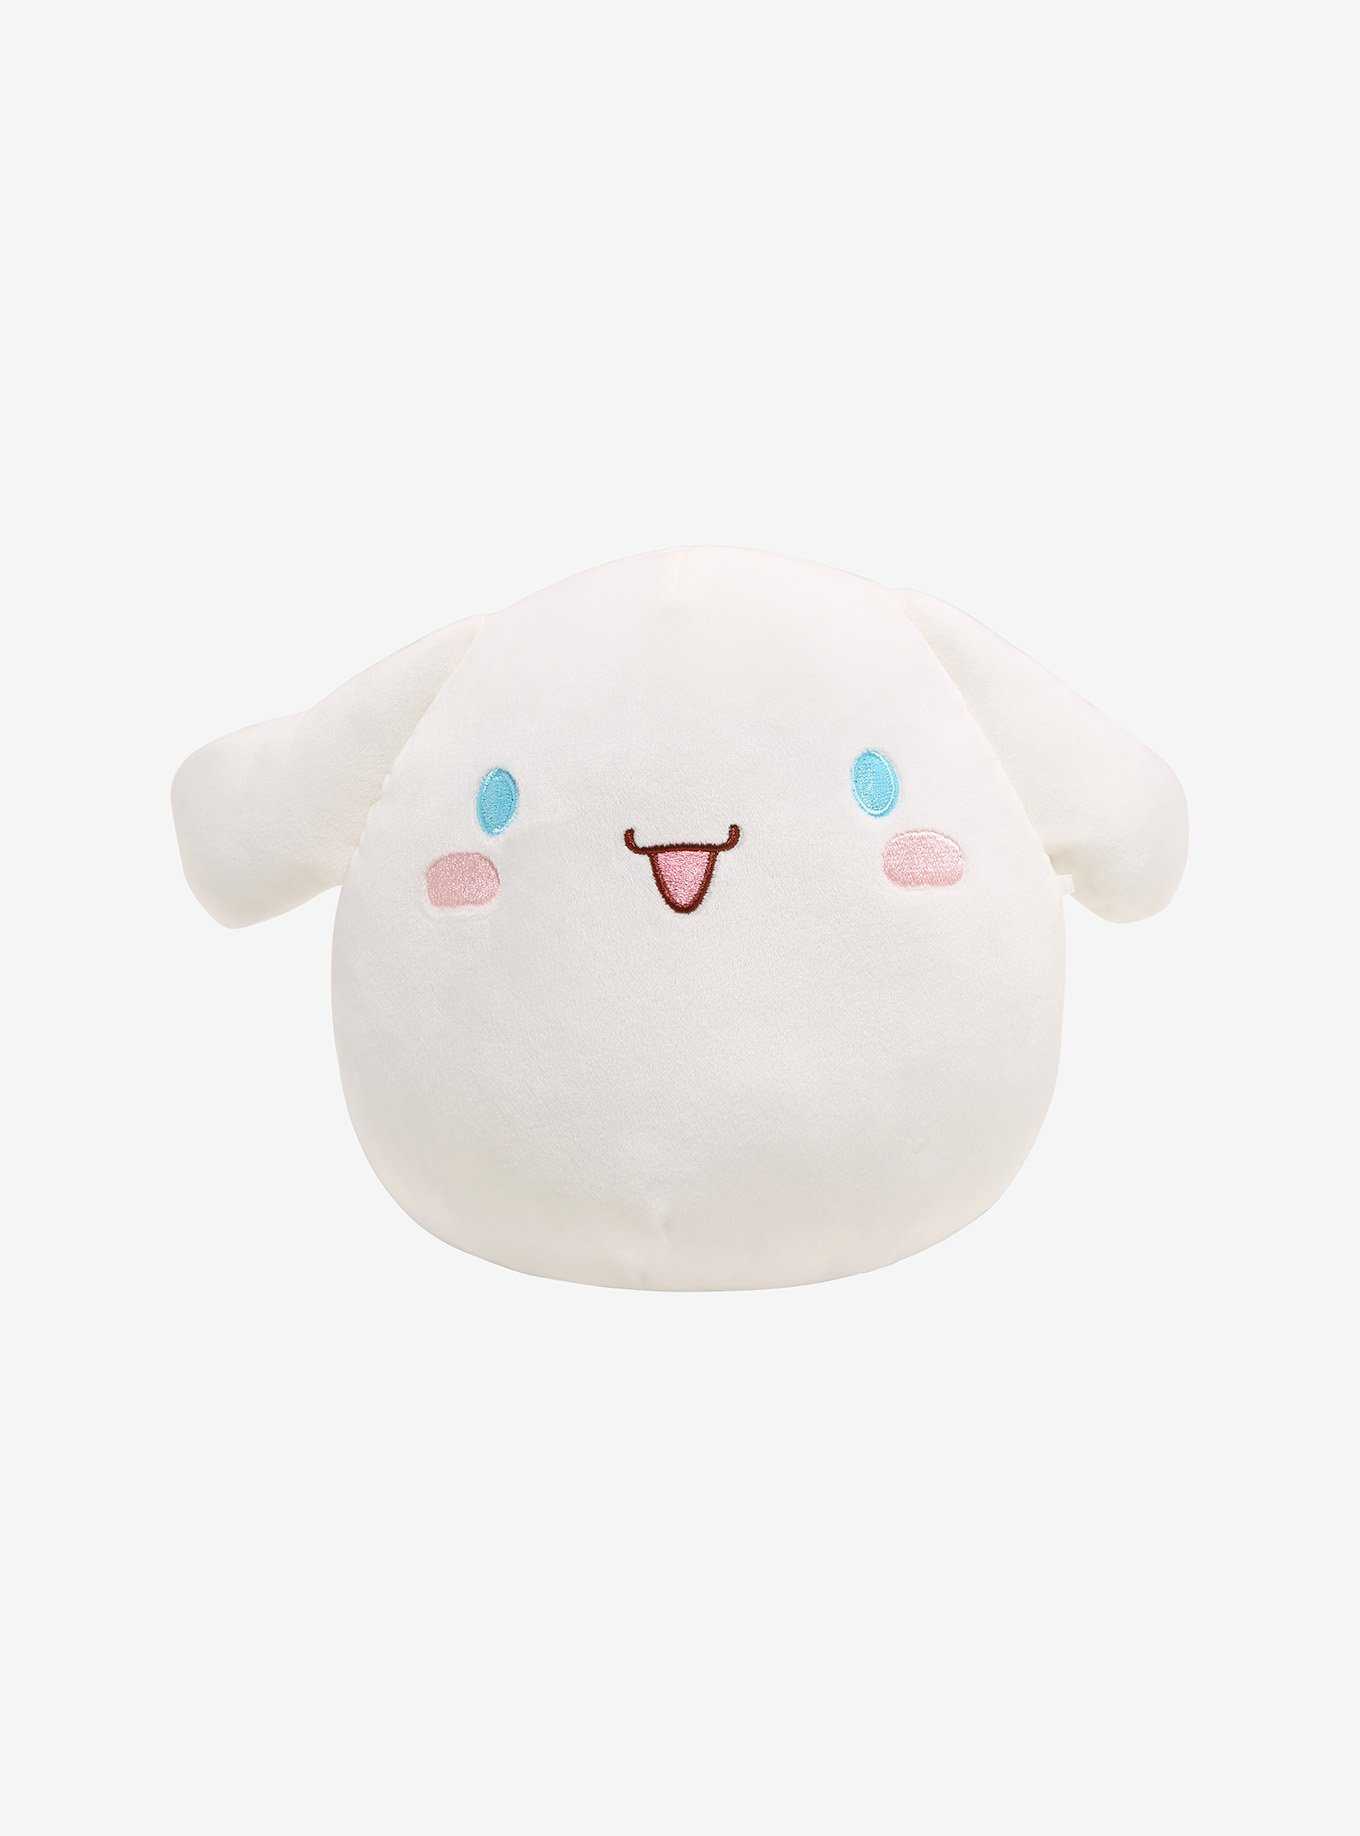 OFFICAL Squishmallow Plushes, Pillows & Minis